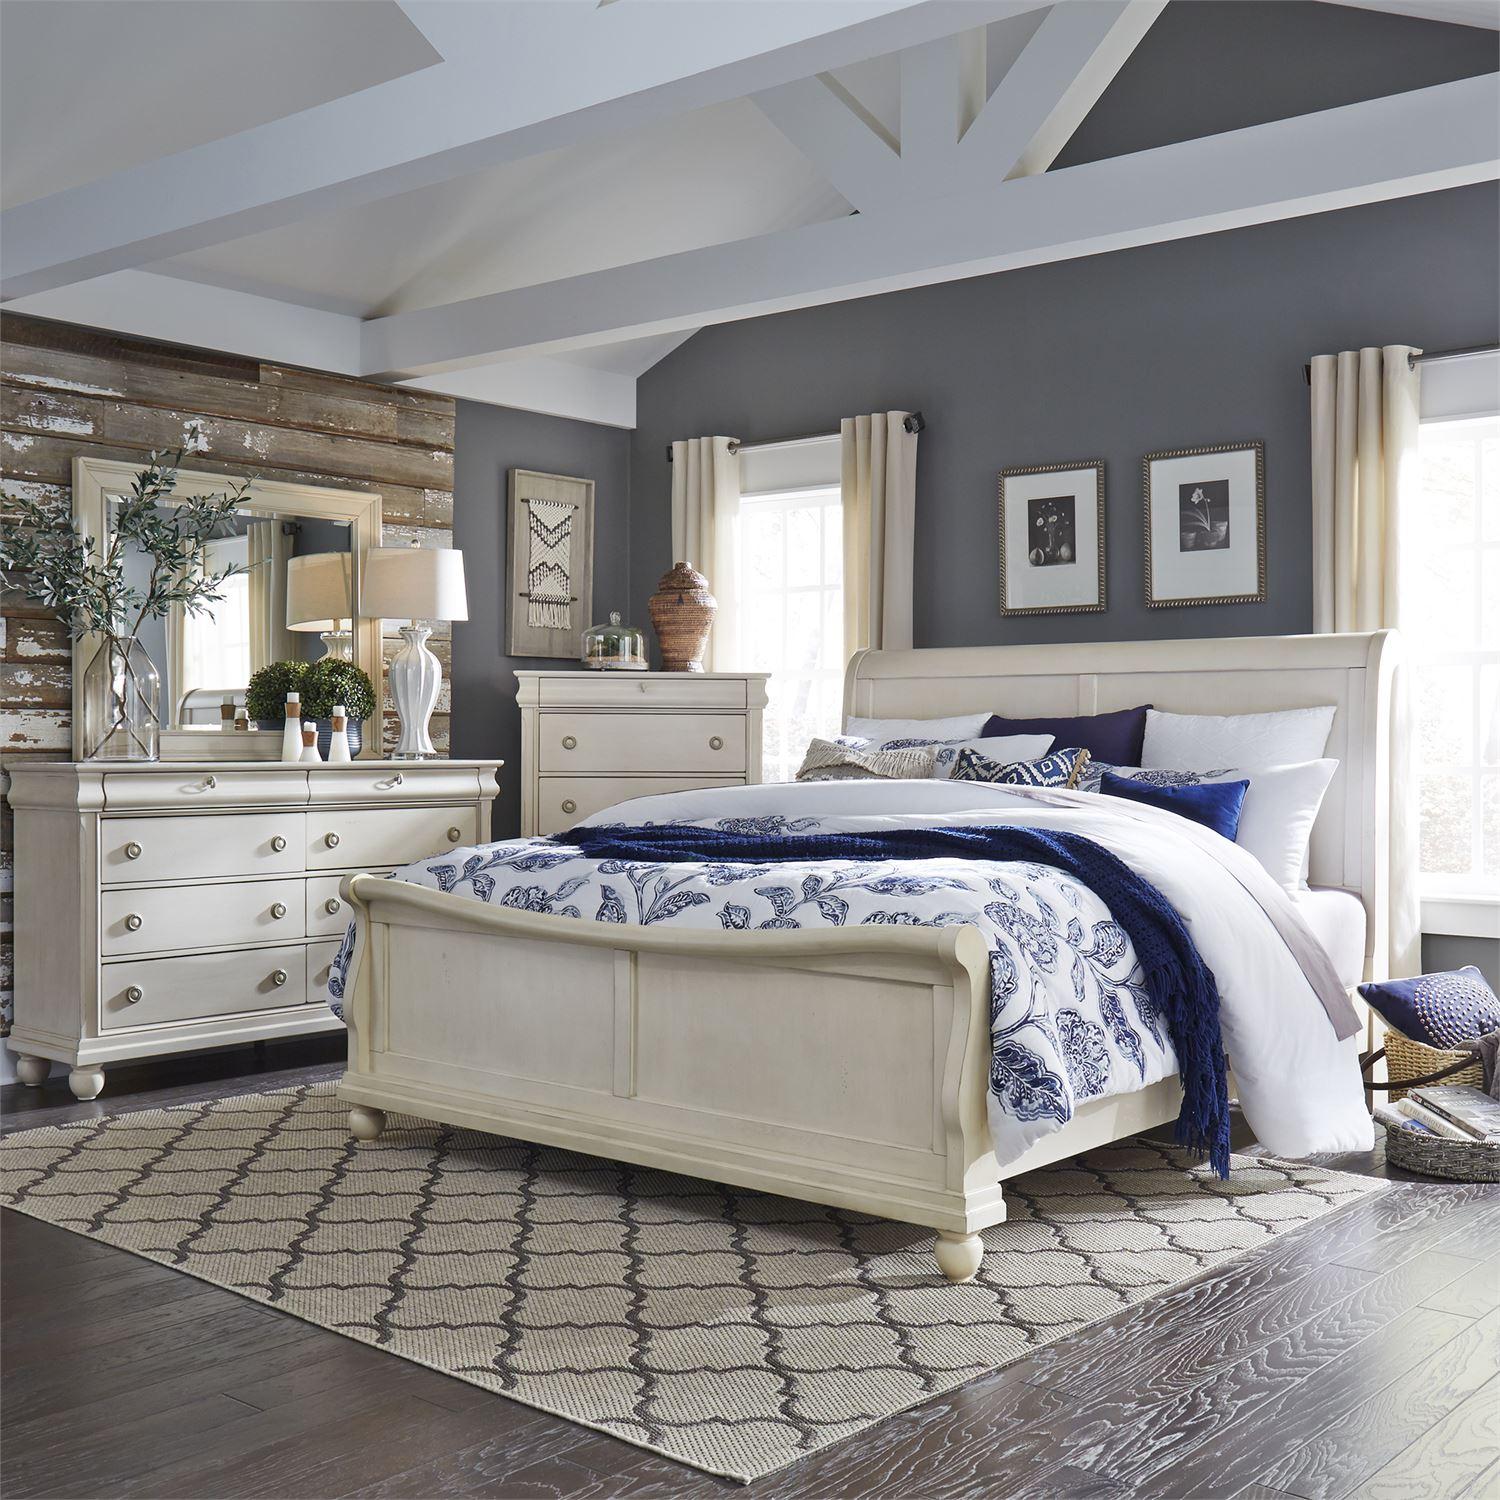 Traditional Sleigh Bedroom Set Rustic Traditions II  (689-BR) Sleigh Bedroom Set 689-BR-QSLDMC in White 